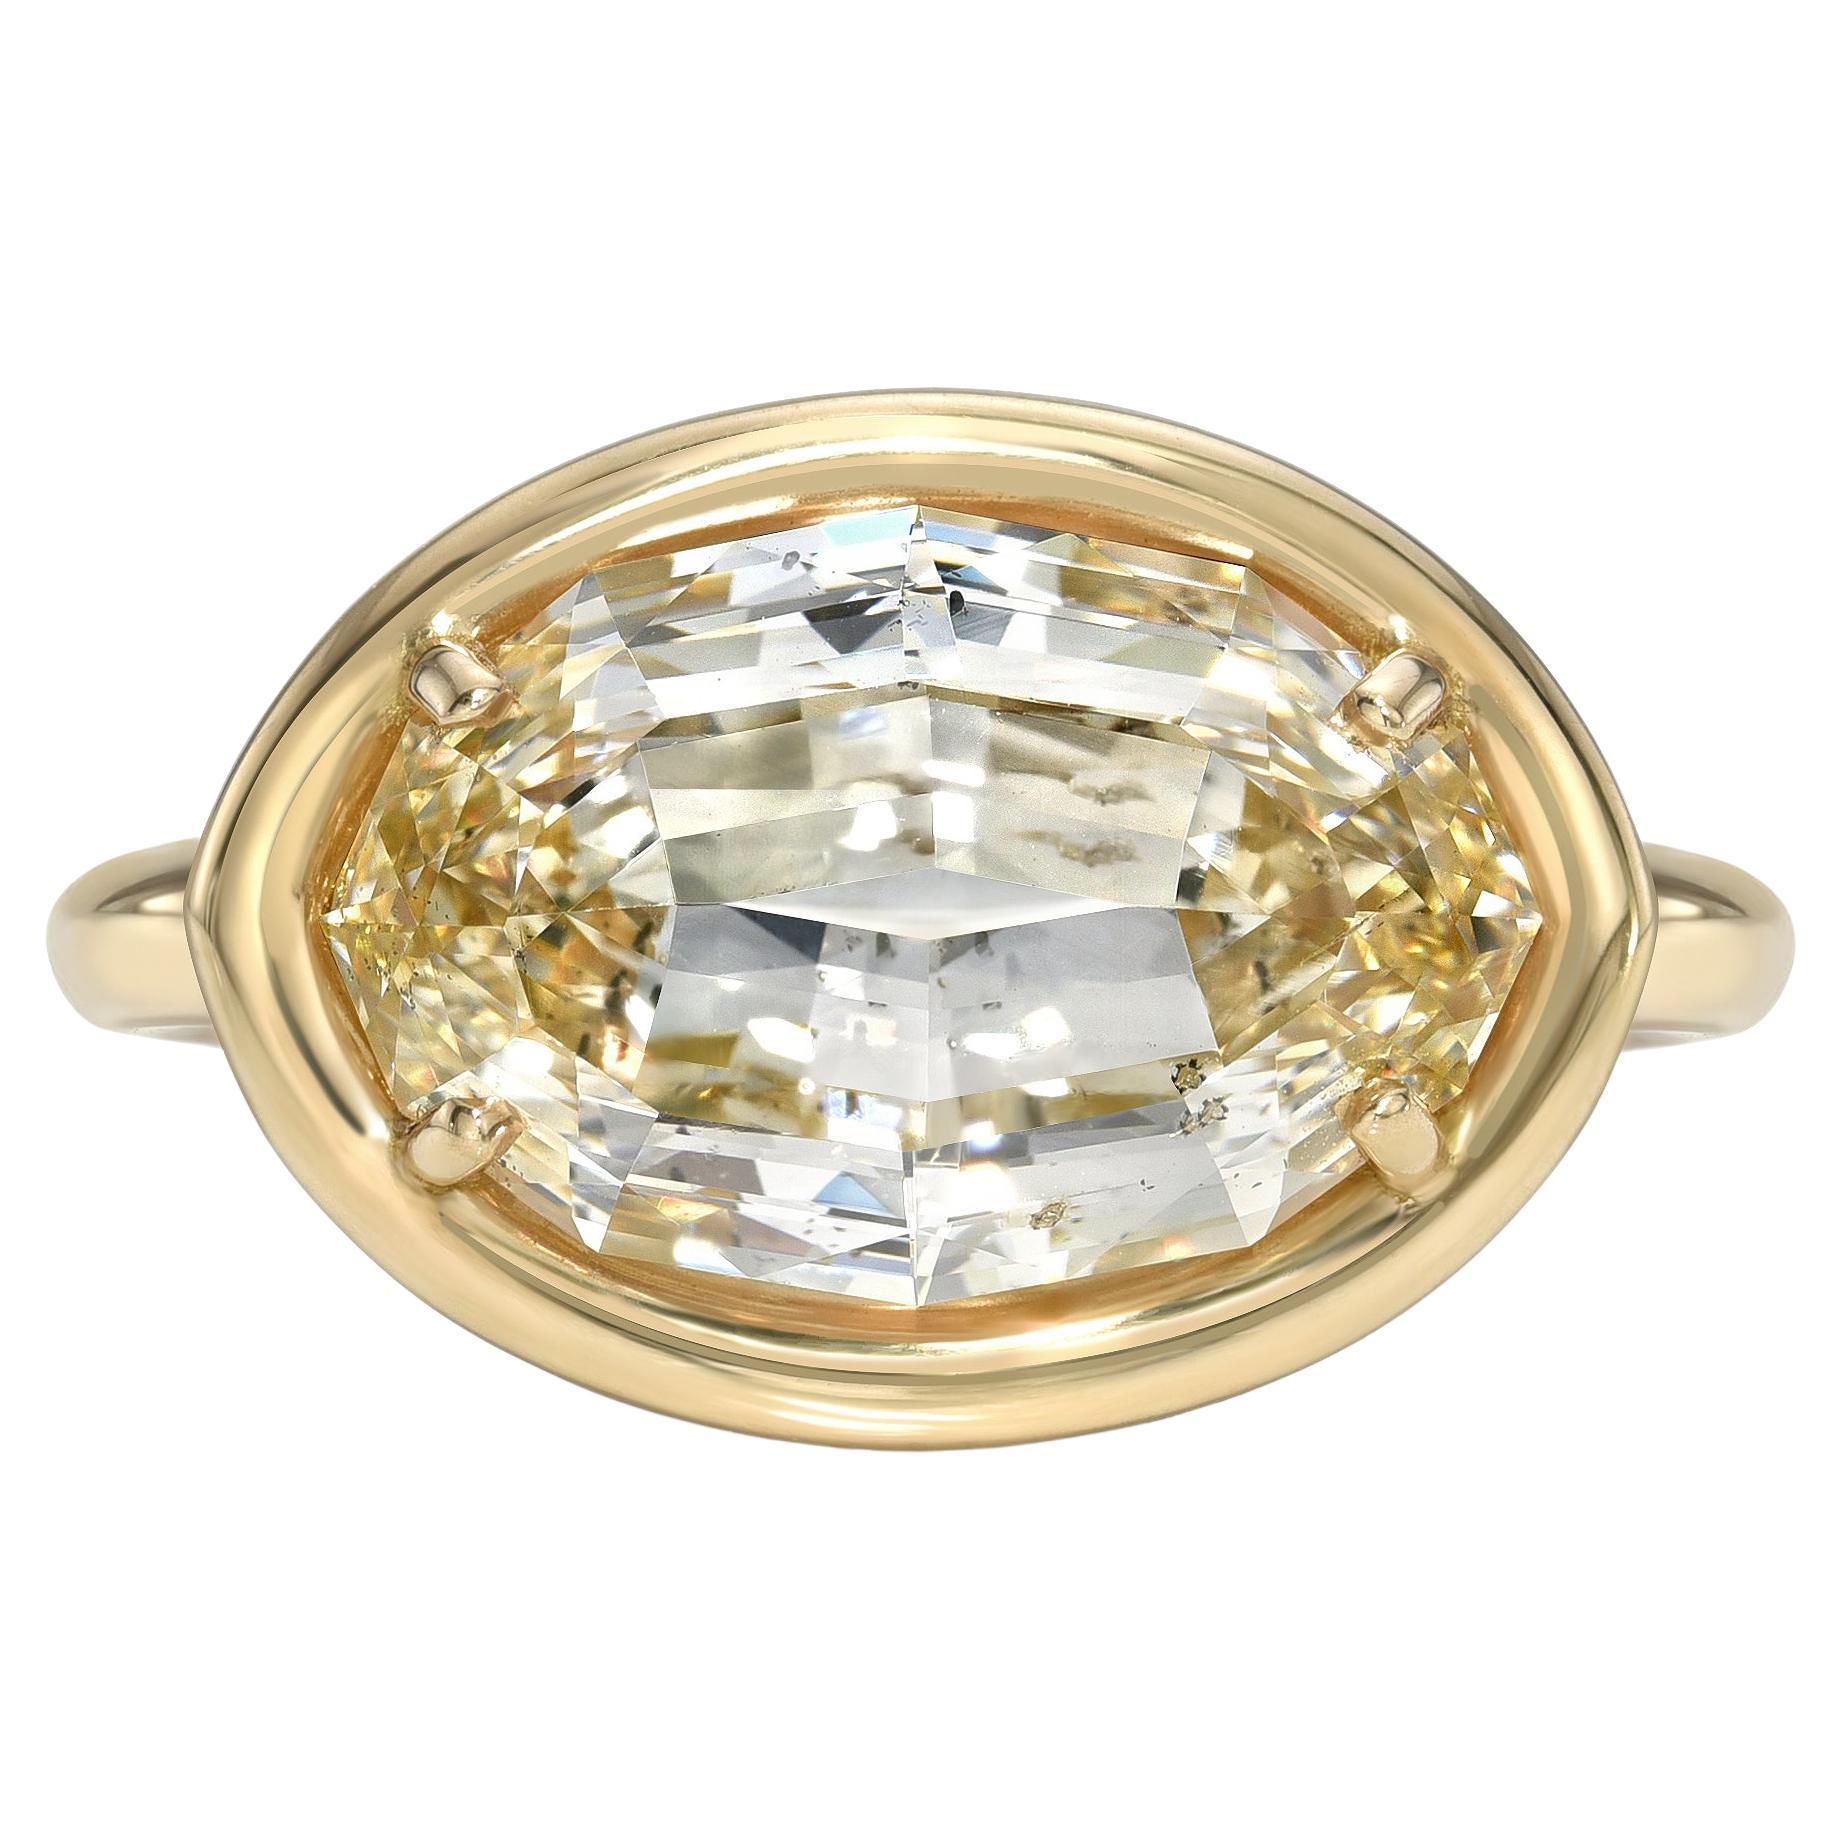 Handcrafted Devi Oval Cut Diamond Ring by Single Stone